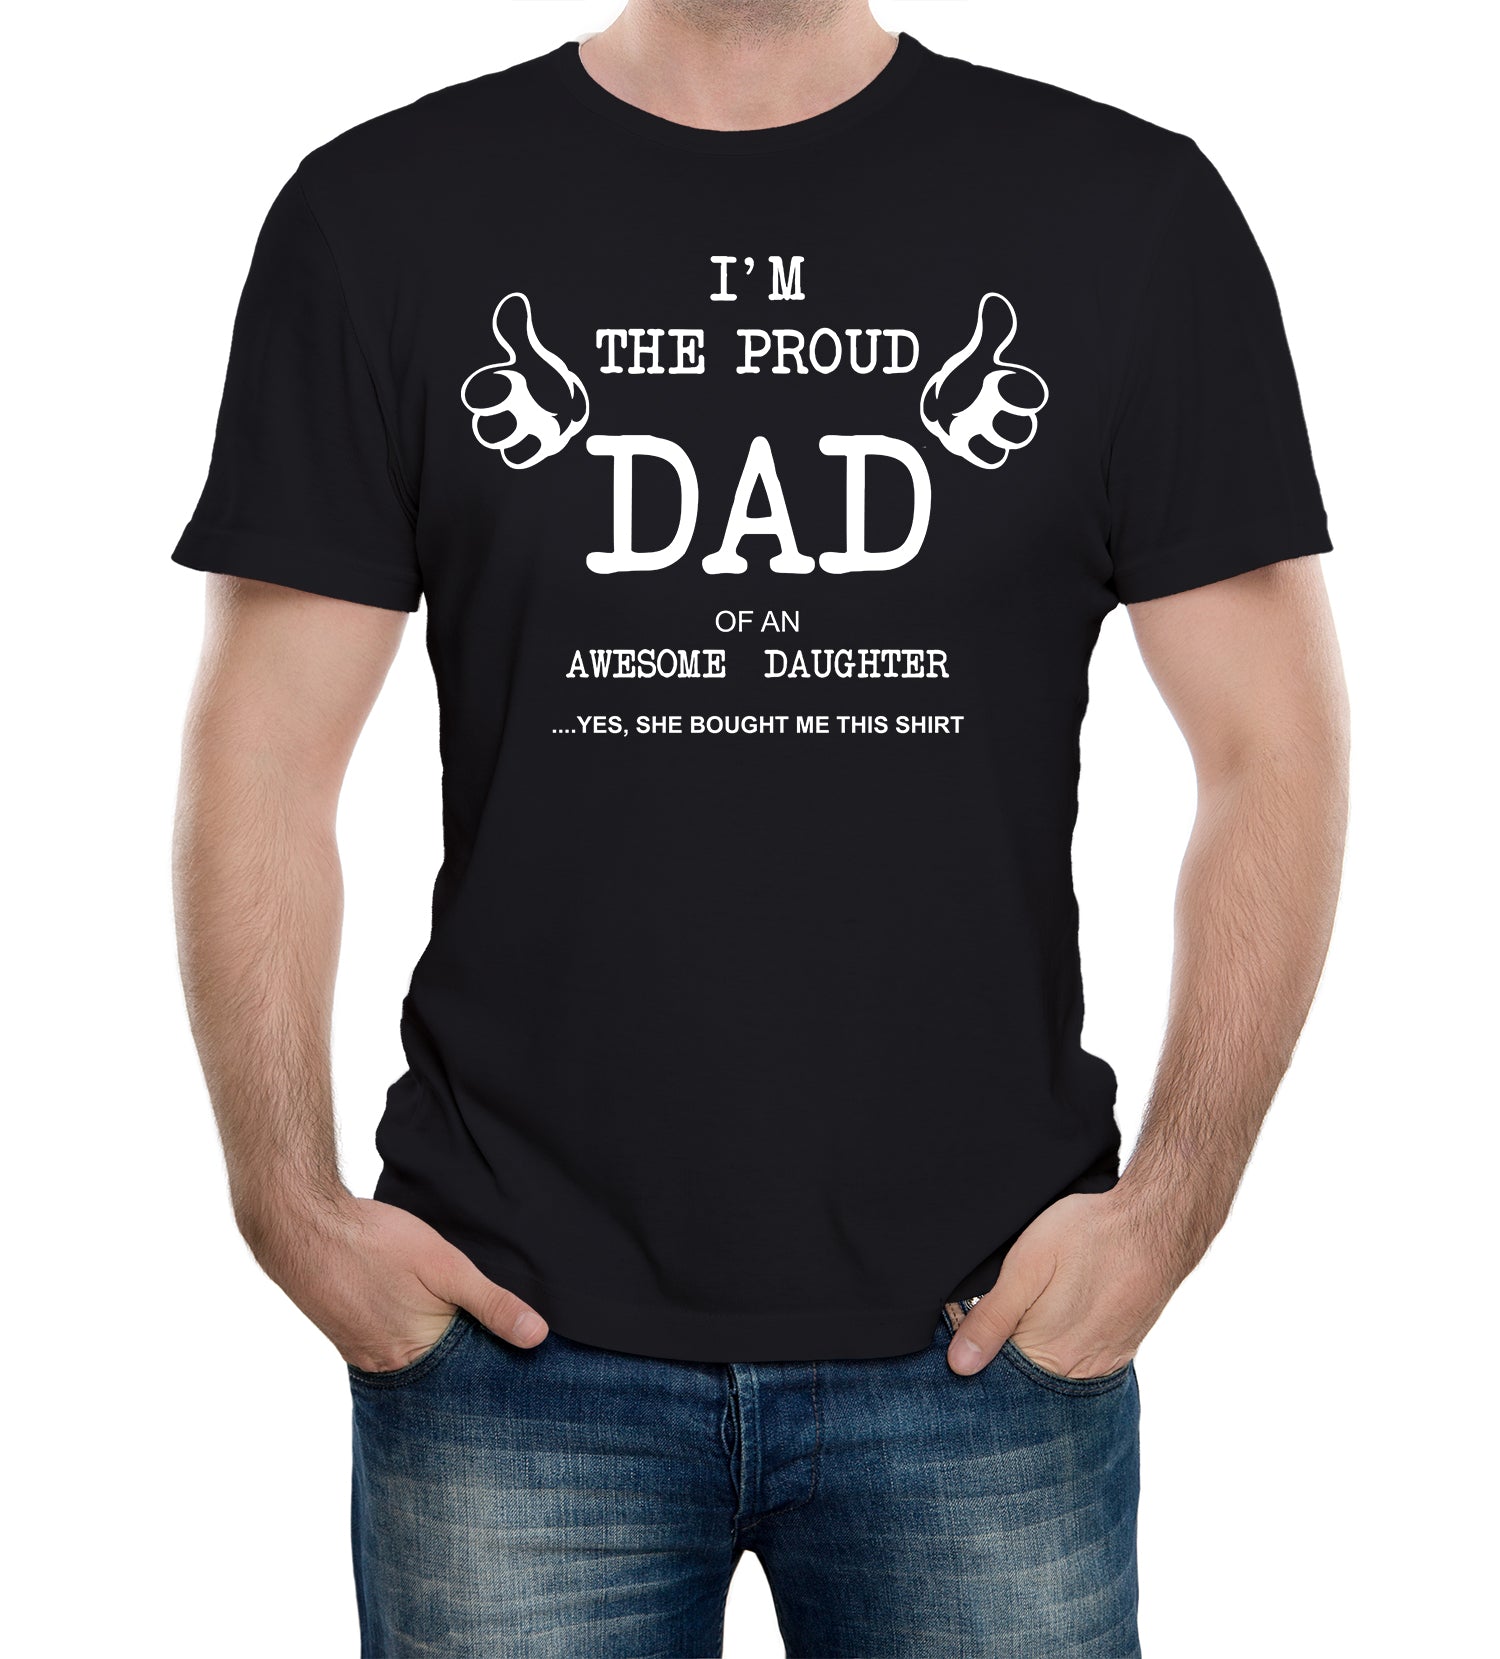 Mens Proud Dad of Awesome Daughter T-Shirt Fathers Day Funny Daddy | eBay